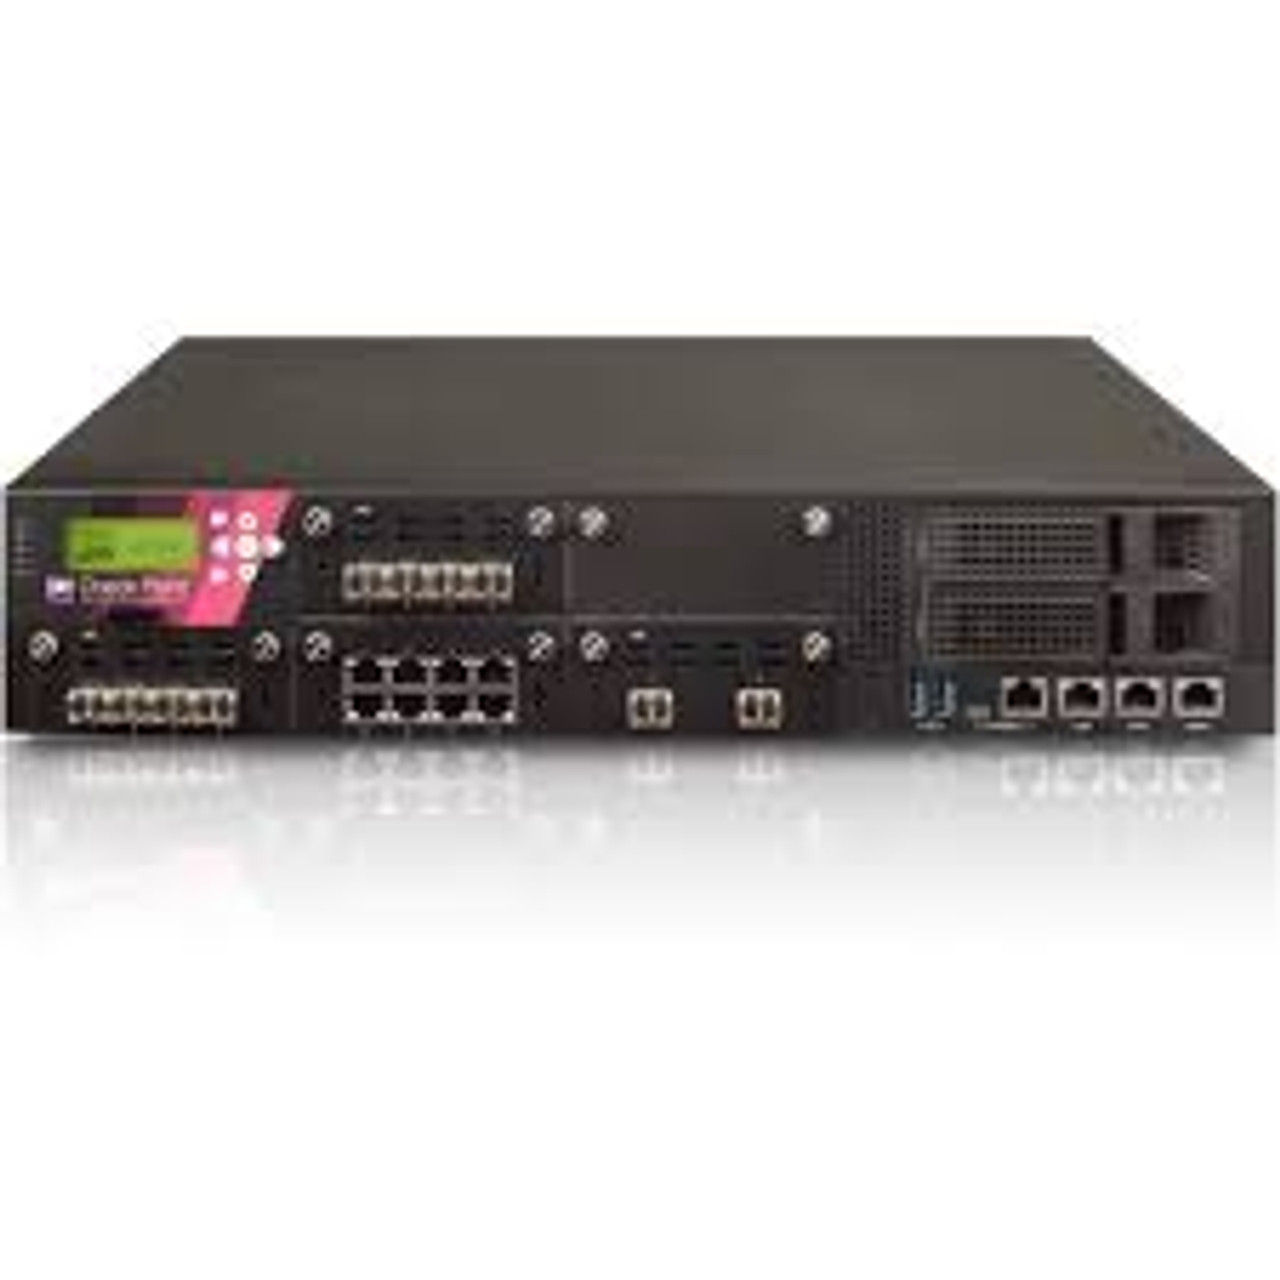 23500 Next Generation Threat Prevention & SandBlast (NGTX) Appliance - High Performance Package with 20 Virtual Systems